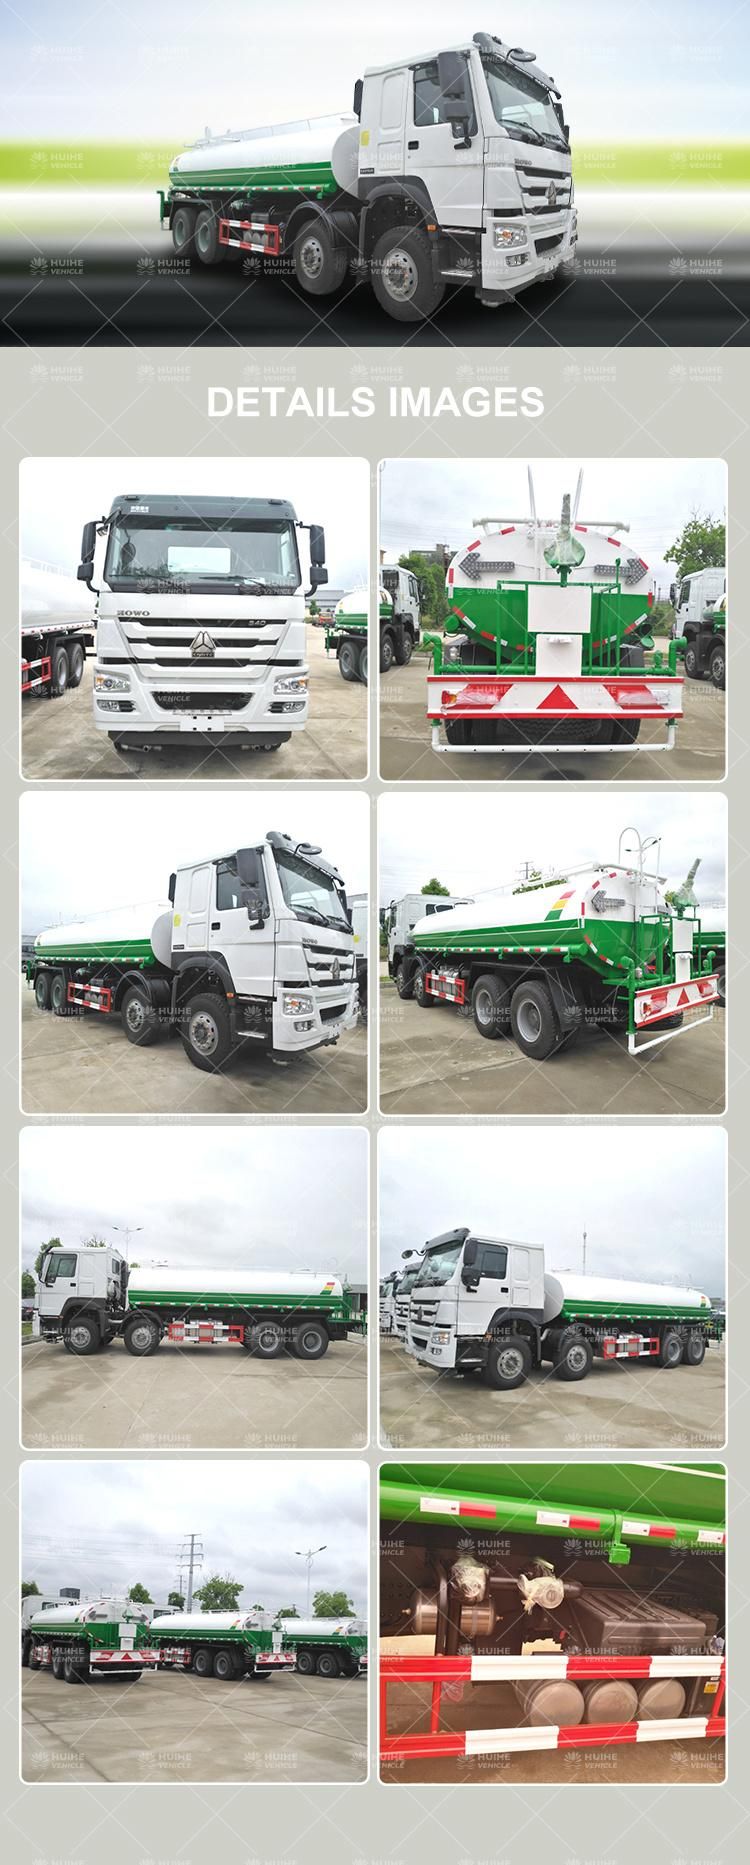 Used Water Truck Price Used Water Tanker HOWO Used Left Hand Drive Used Water Truck Tanker for West Africa